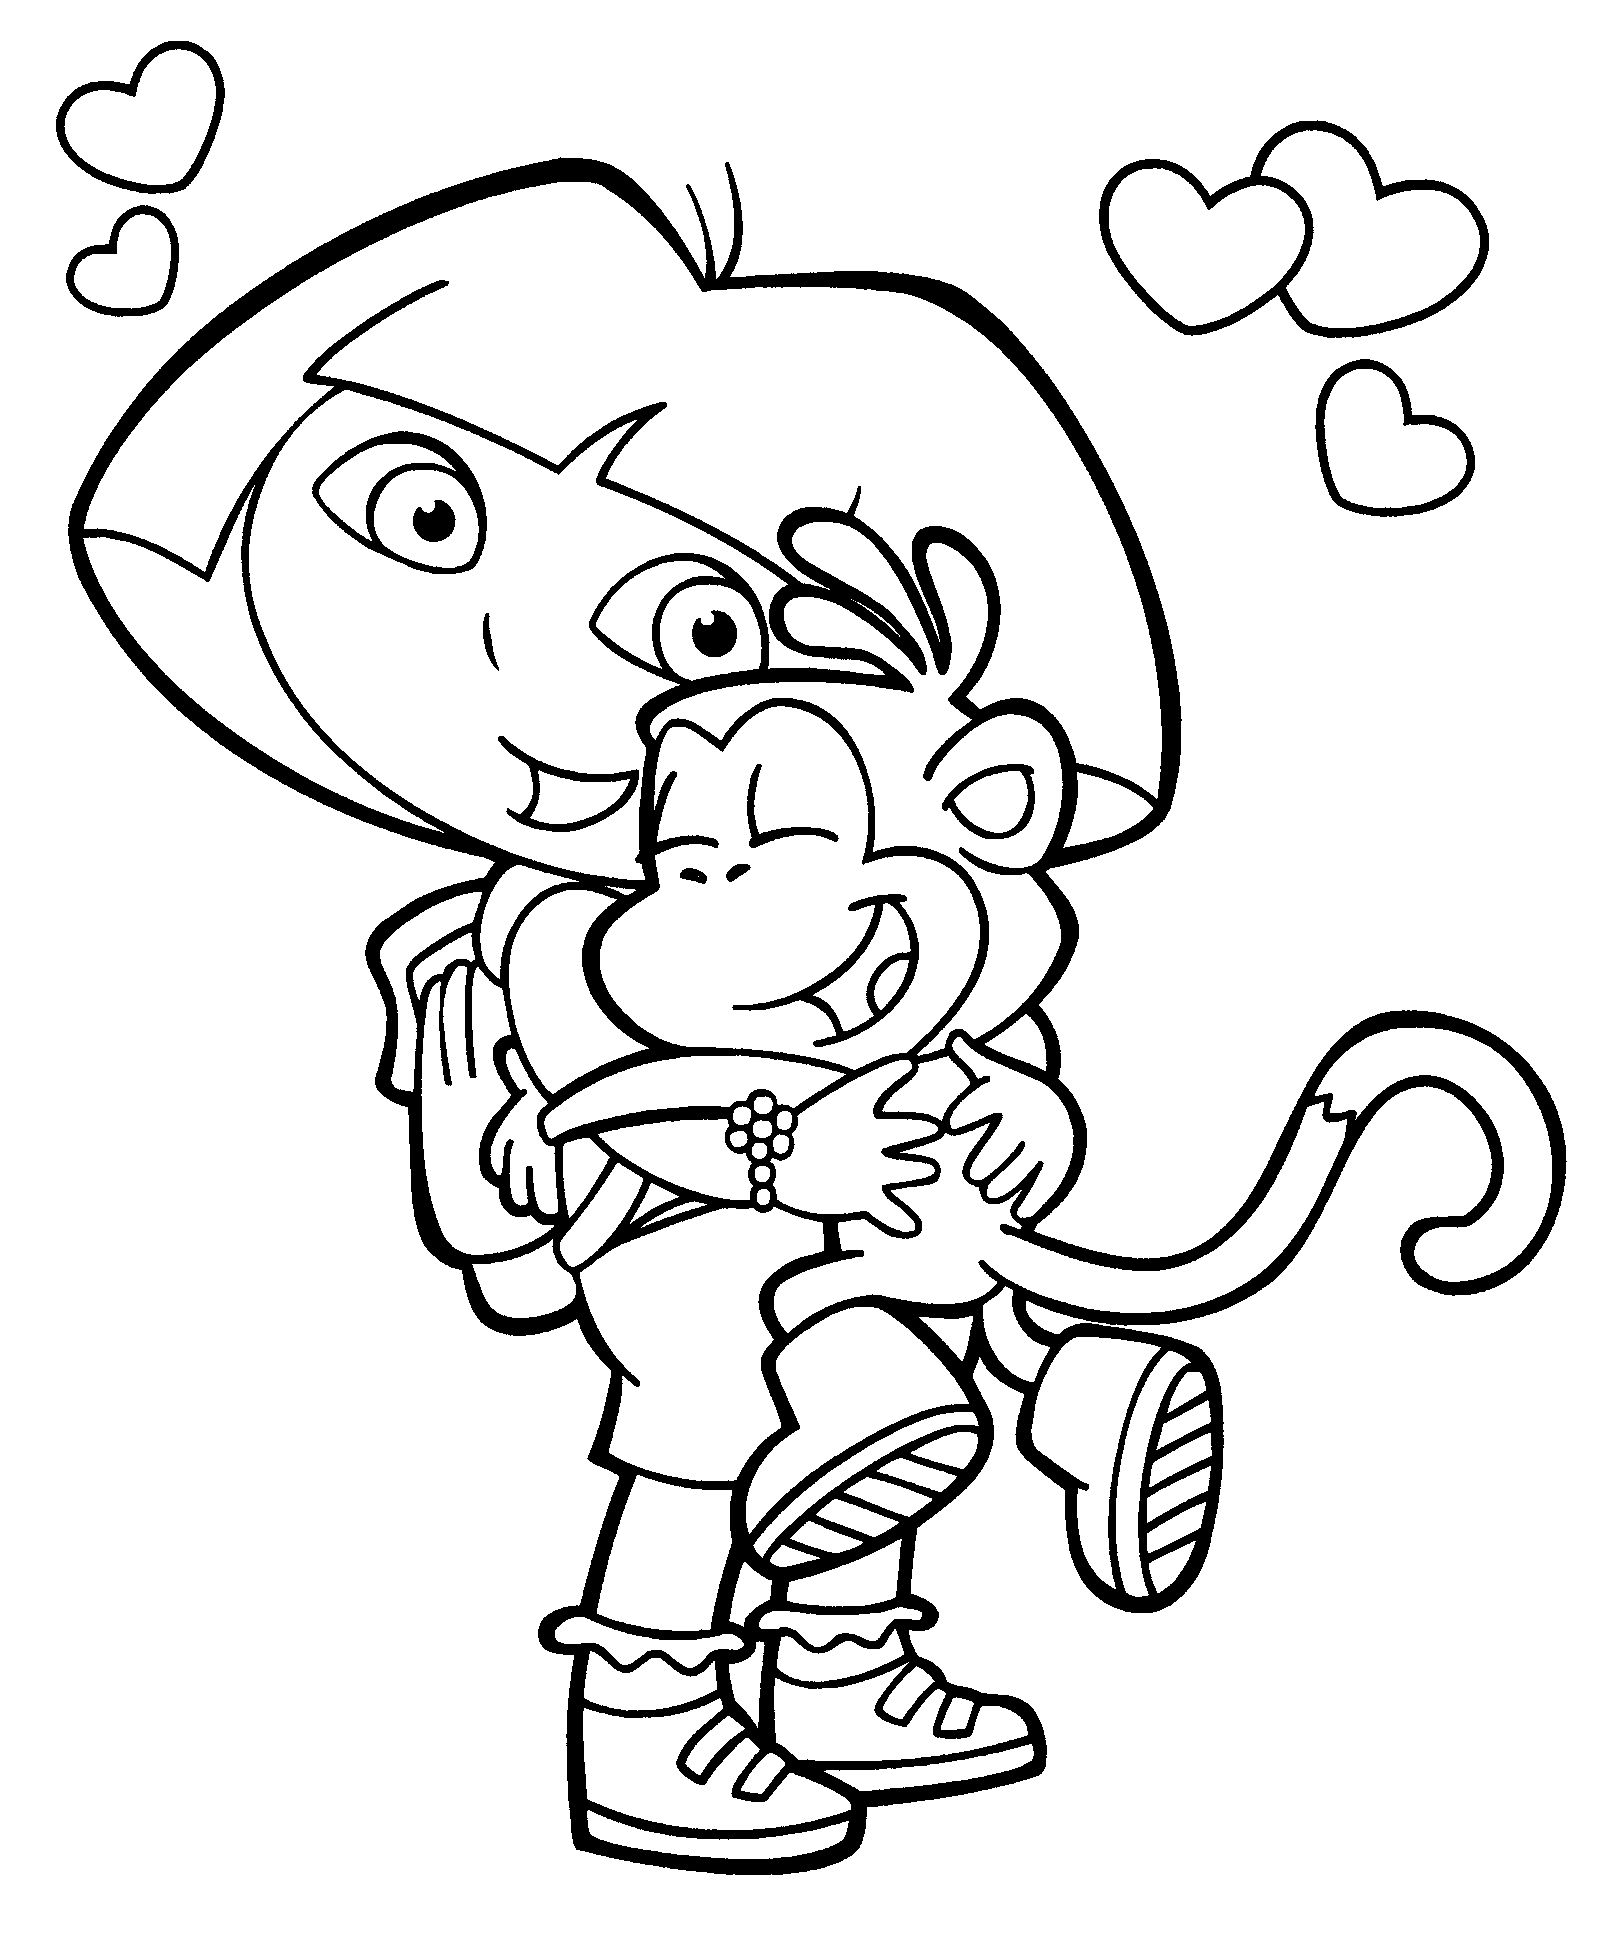 Dora Coloring Pages To Print